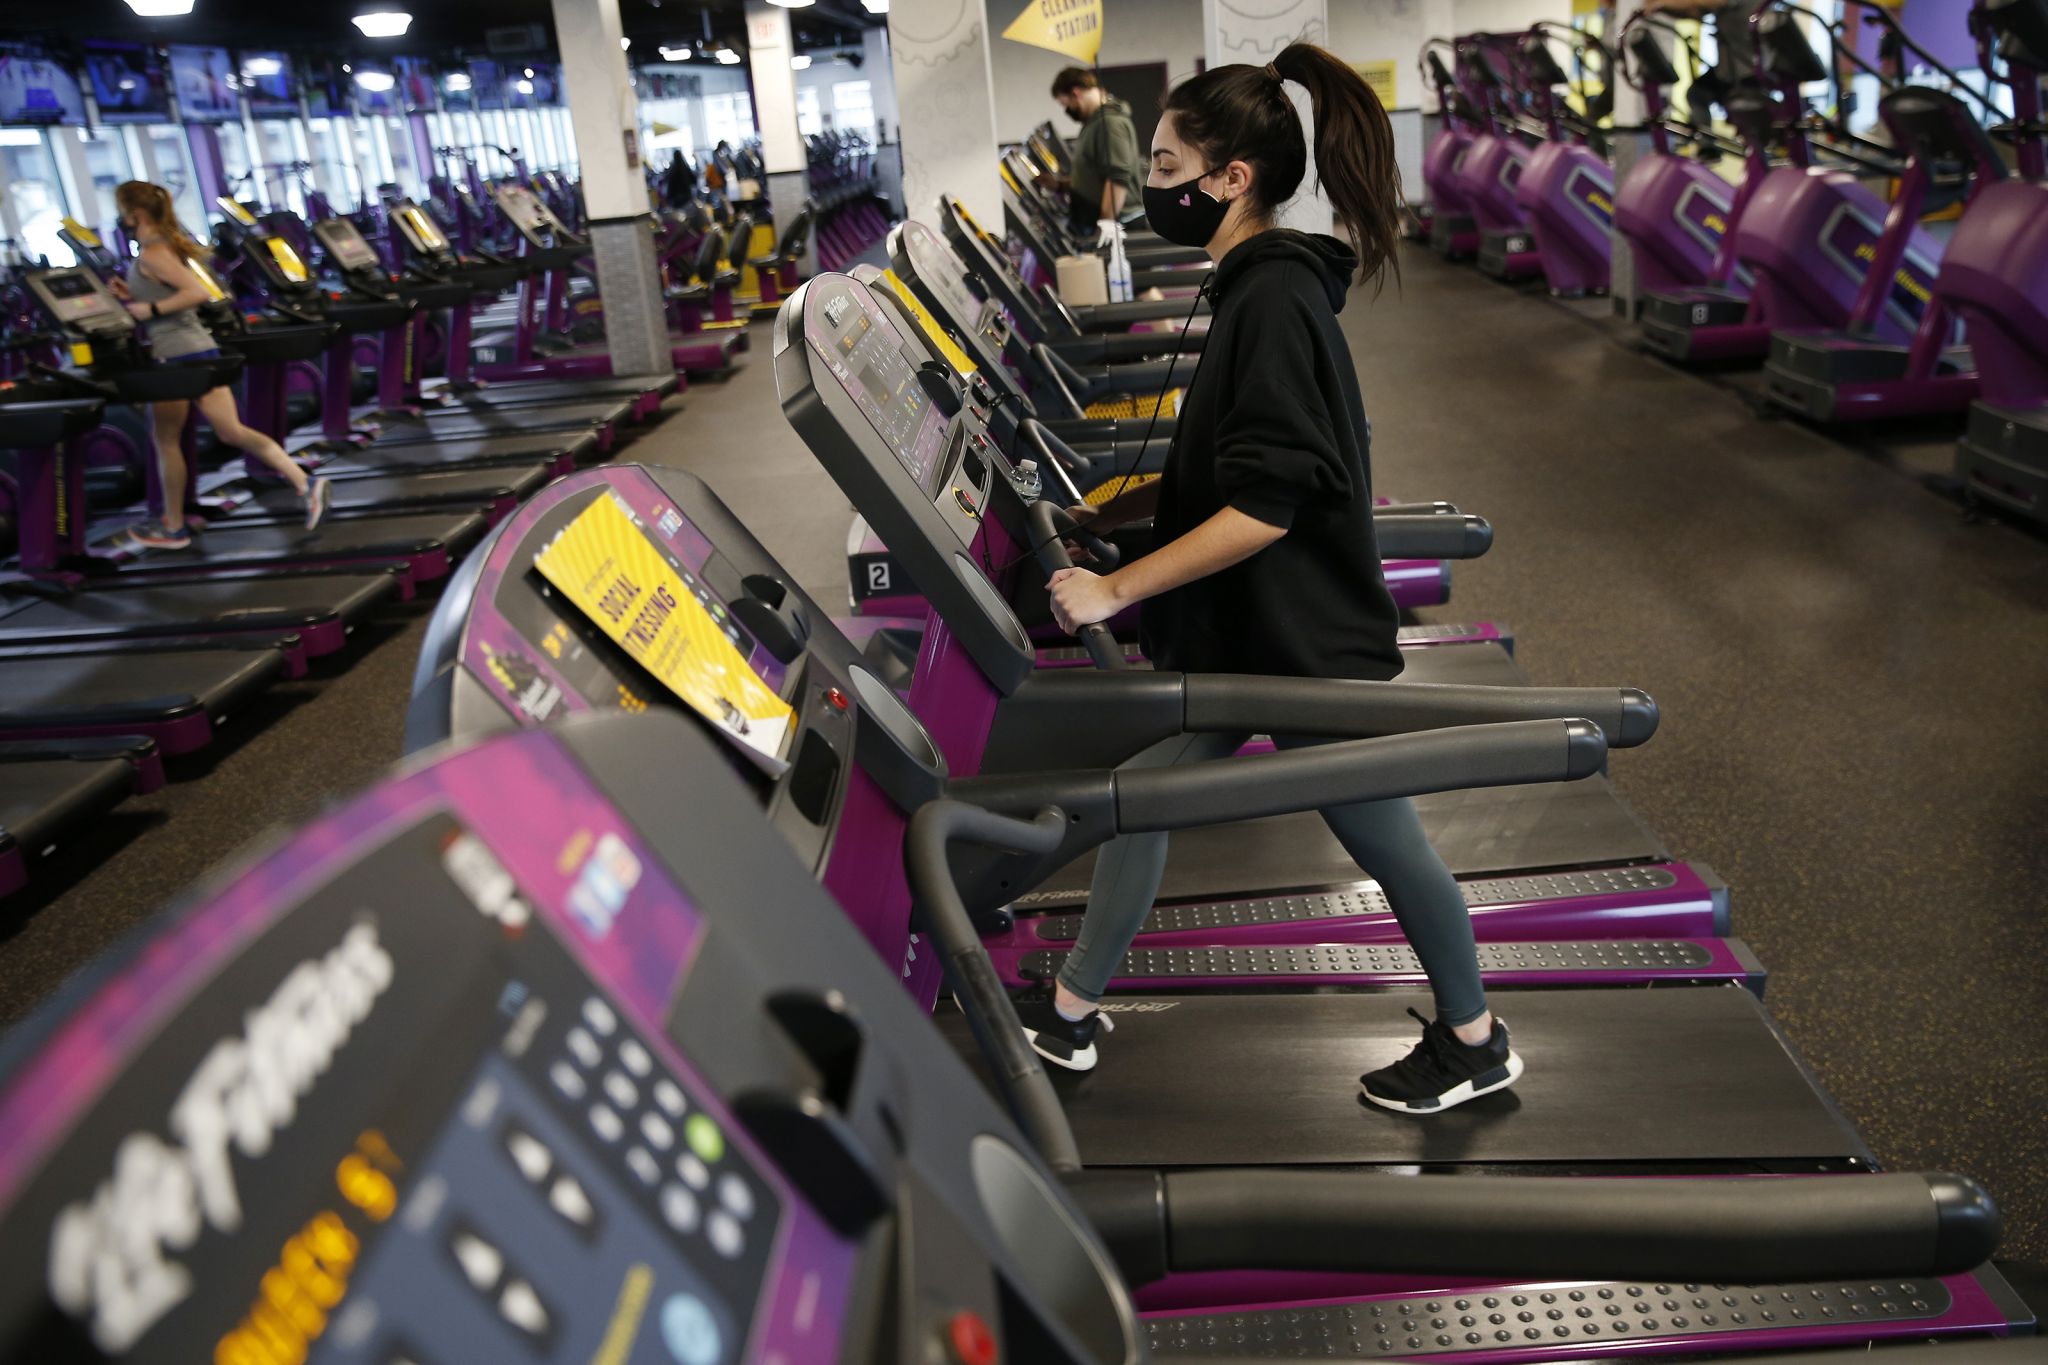 30 Minute How Much Planet Fitness Pay for Weight Loss